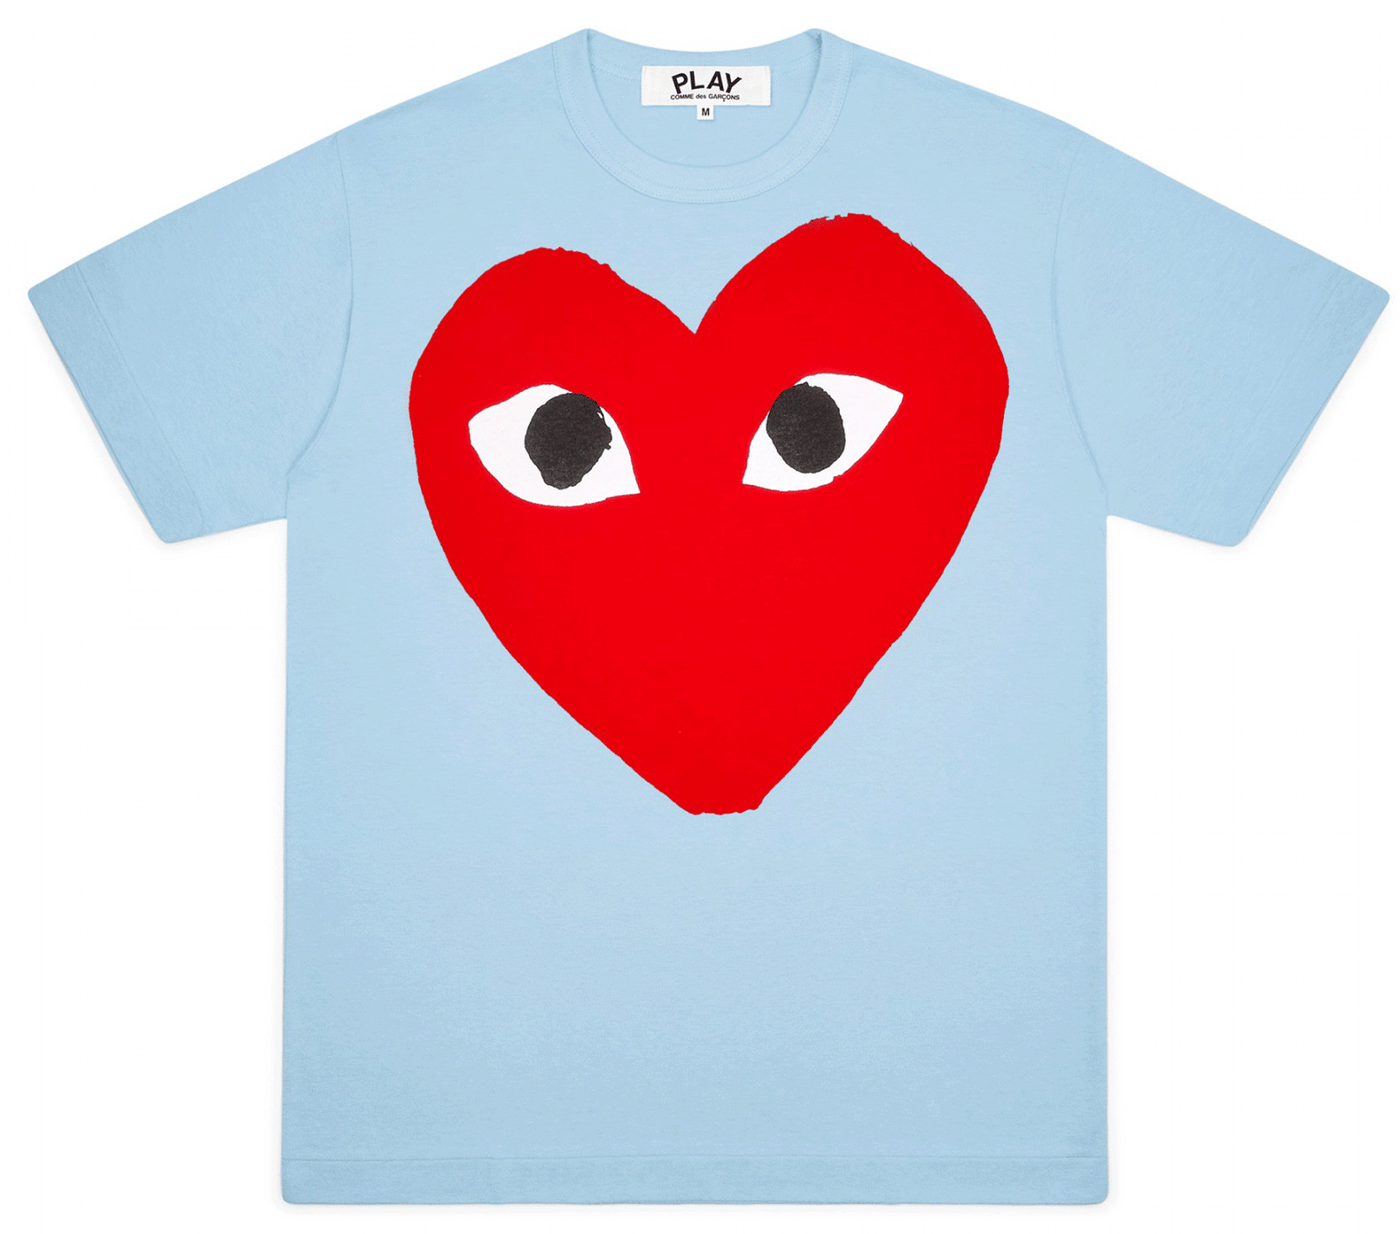 Comme-des-Garcons-Play-Bright-Red-Big-Heart-T-Shirt-Women-Blue-1